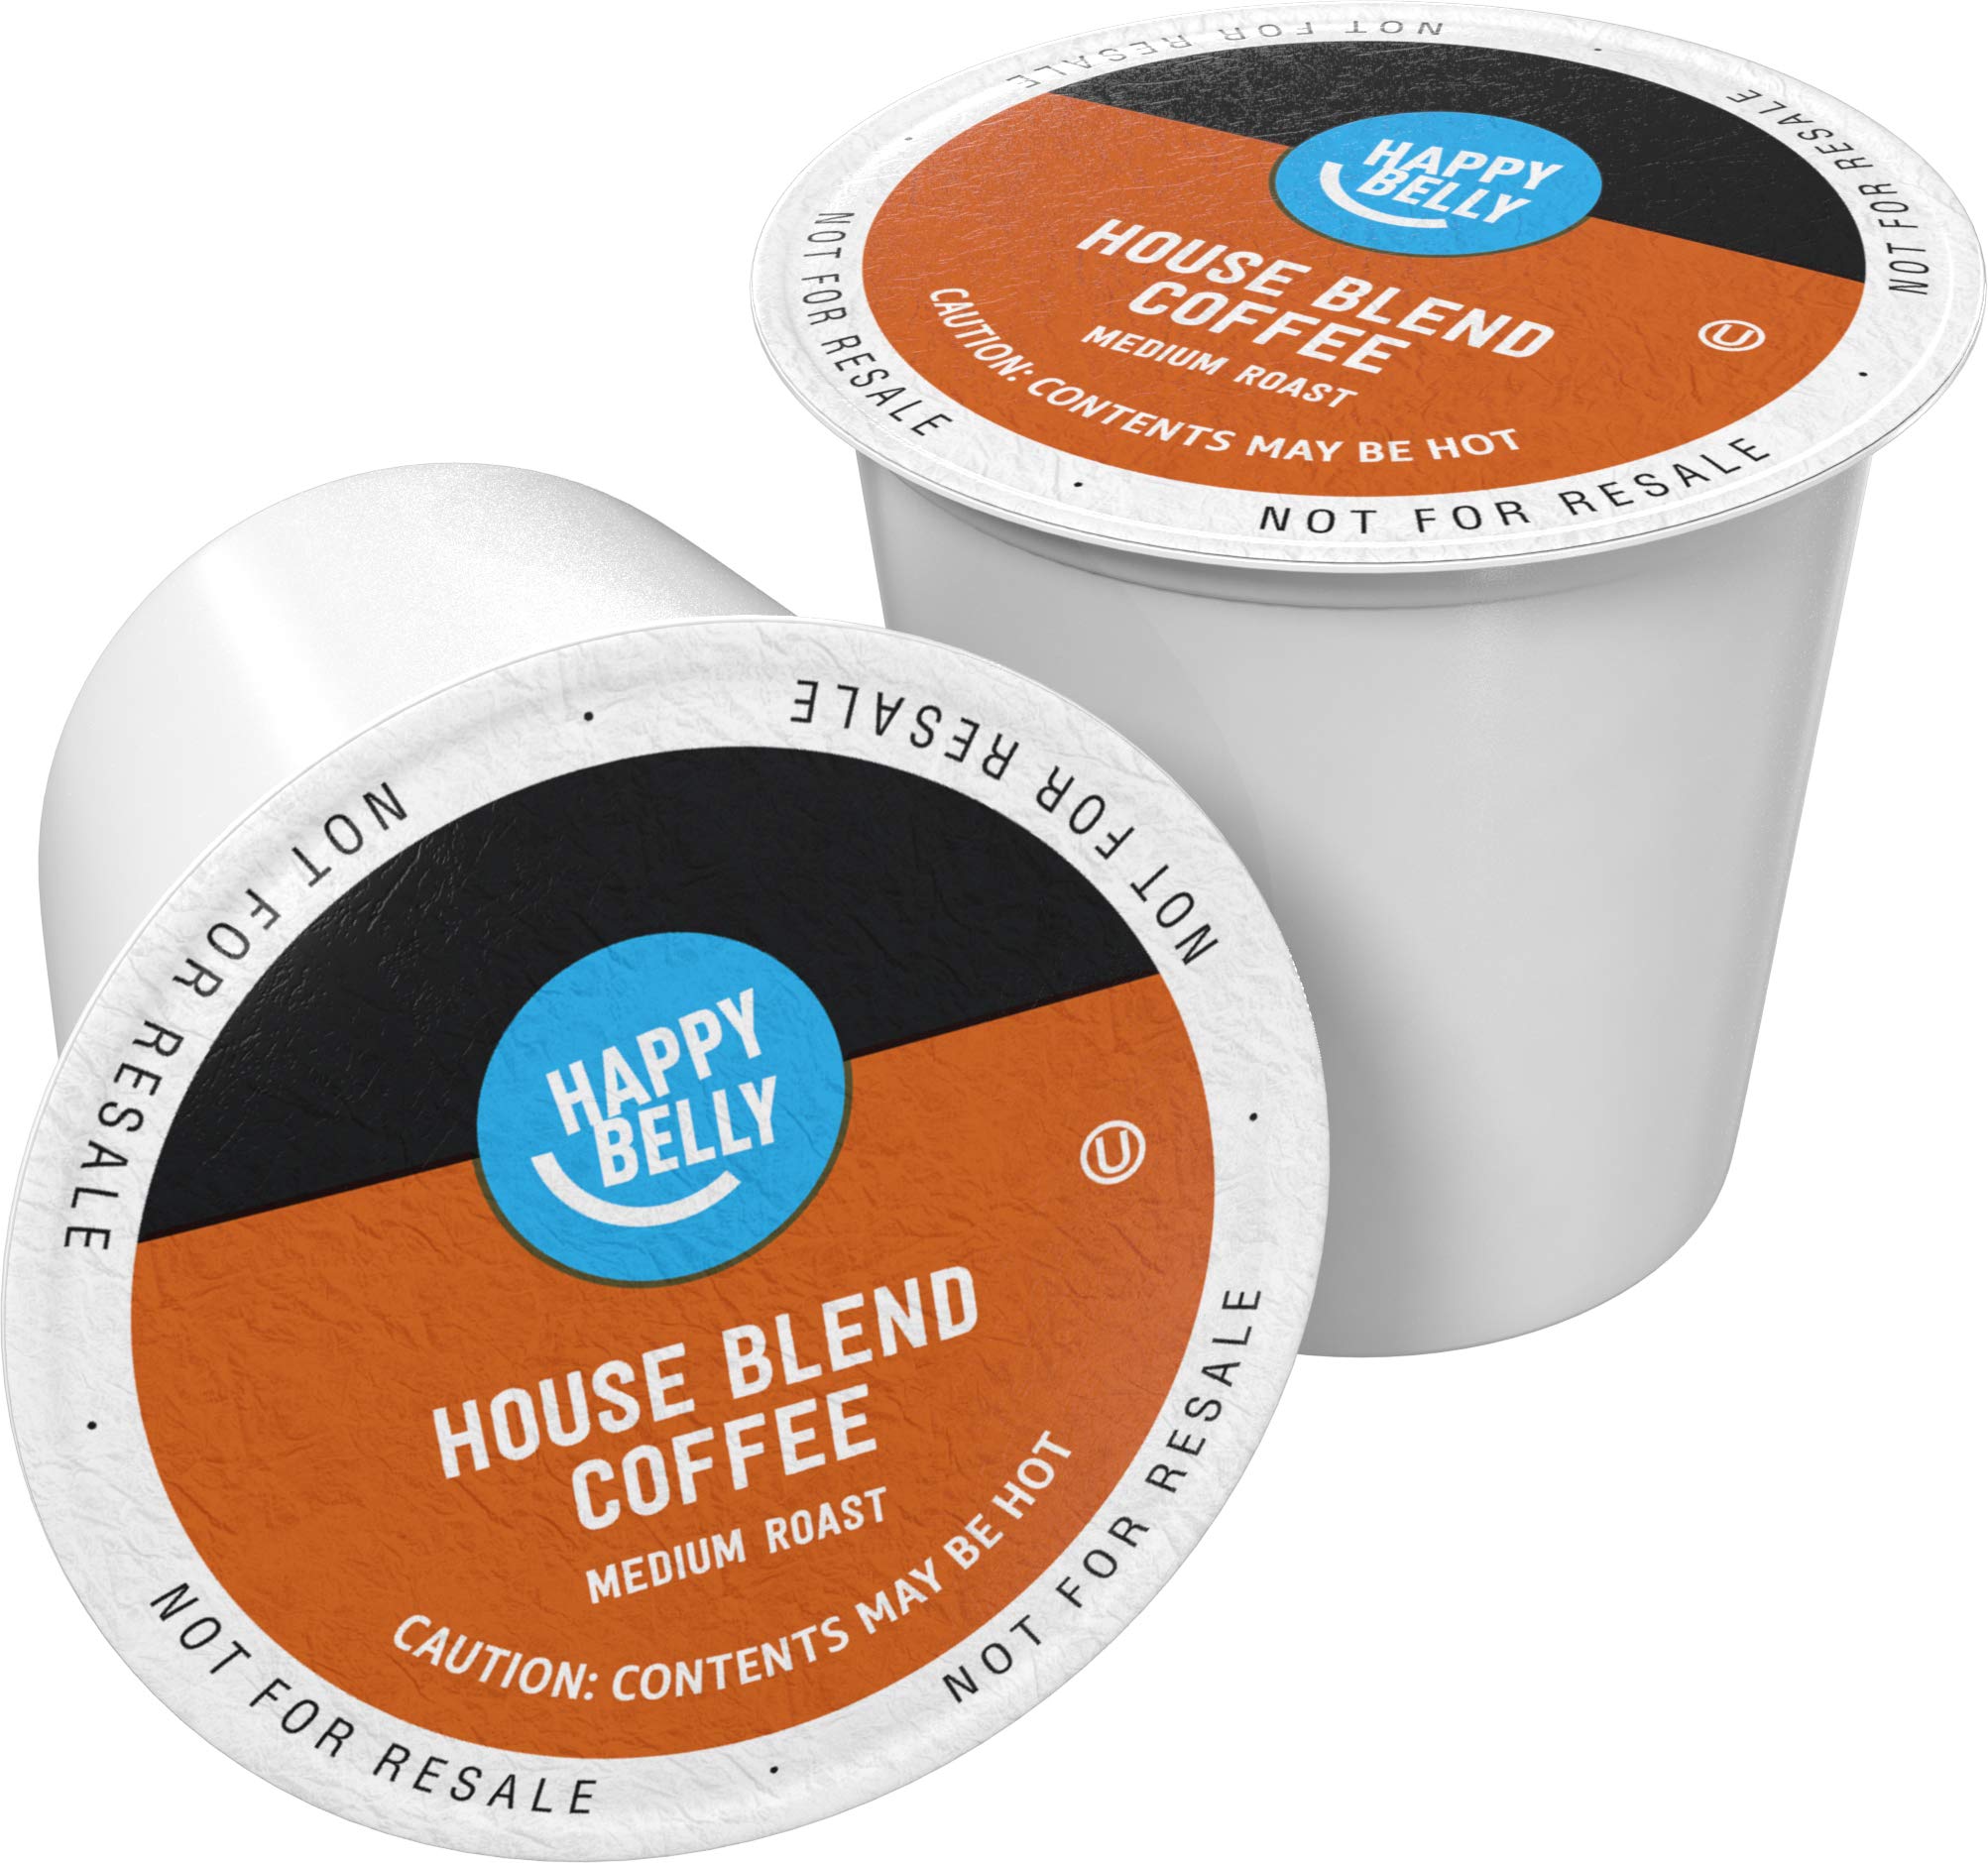 YMMV Coffee K-Cups, Happy Belly (Amazon brand) 100ct various types ($13-$17), 40% off one subscribe and save order at Amazon